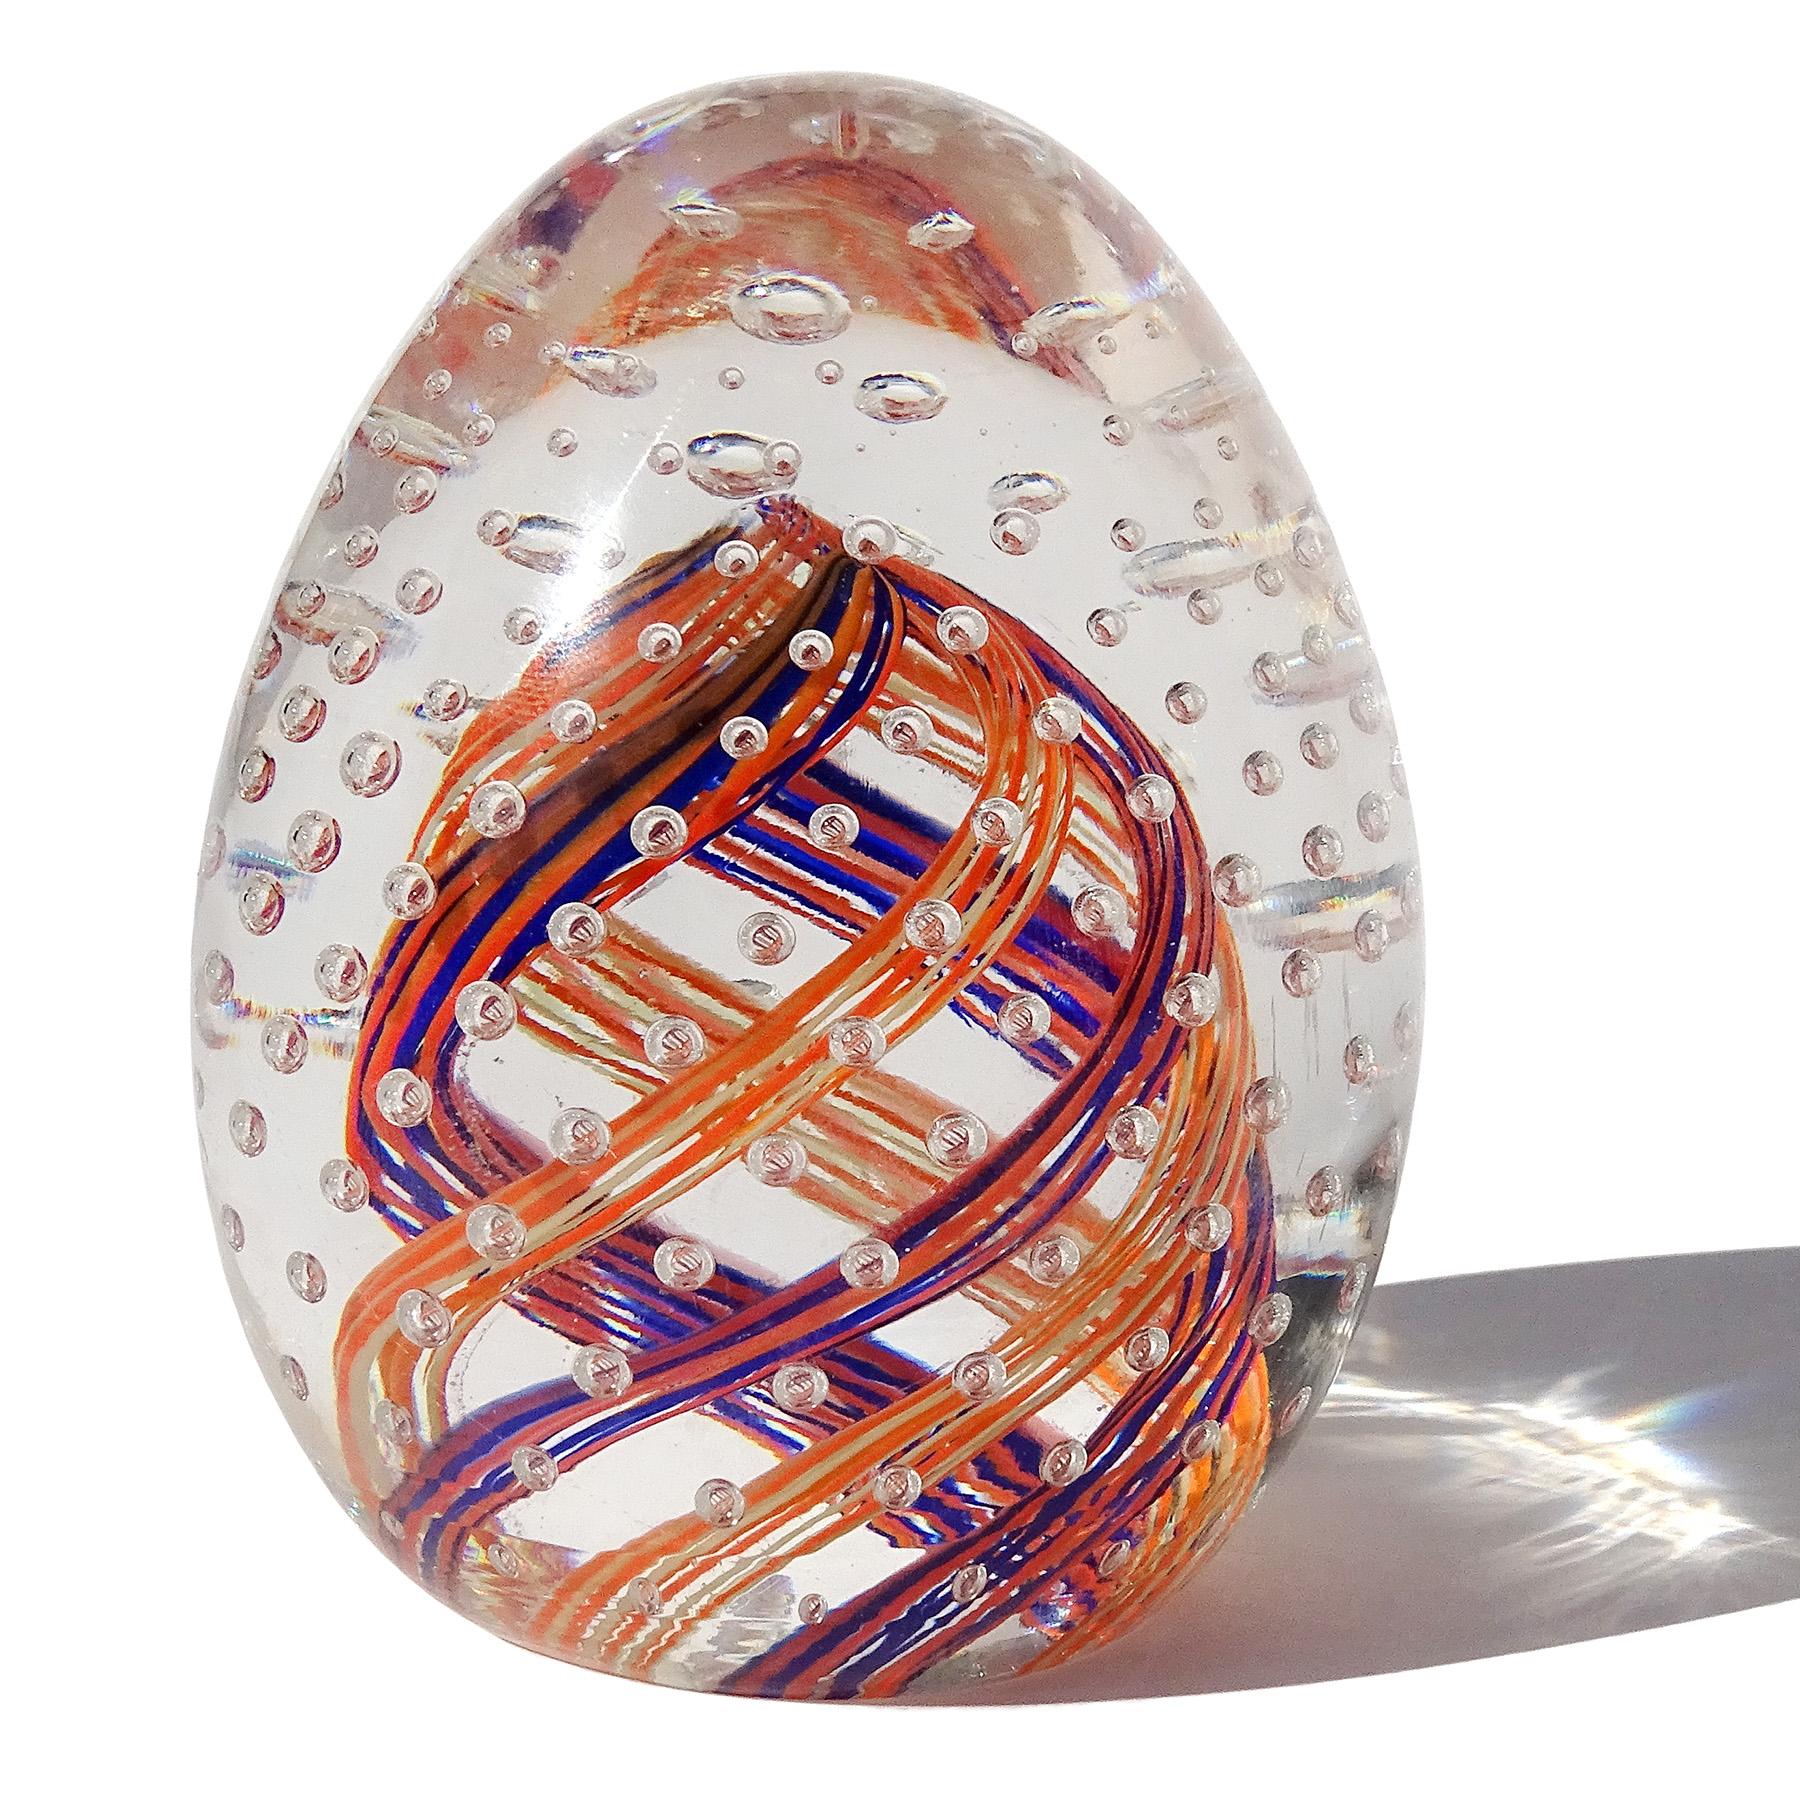 Beautiful and colorful vintage Murano hand blown blue, orange, white and bubbles Italian art glass egg shaped paperweight. Created in the manner of the Fratelli Toso company. This paperweight has orange and cobalt blue, and orange and white twisting